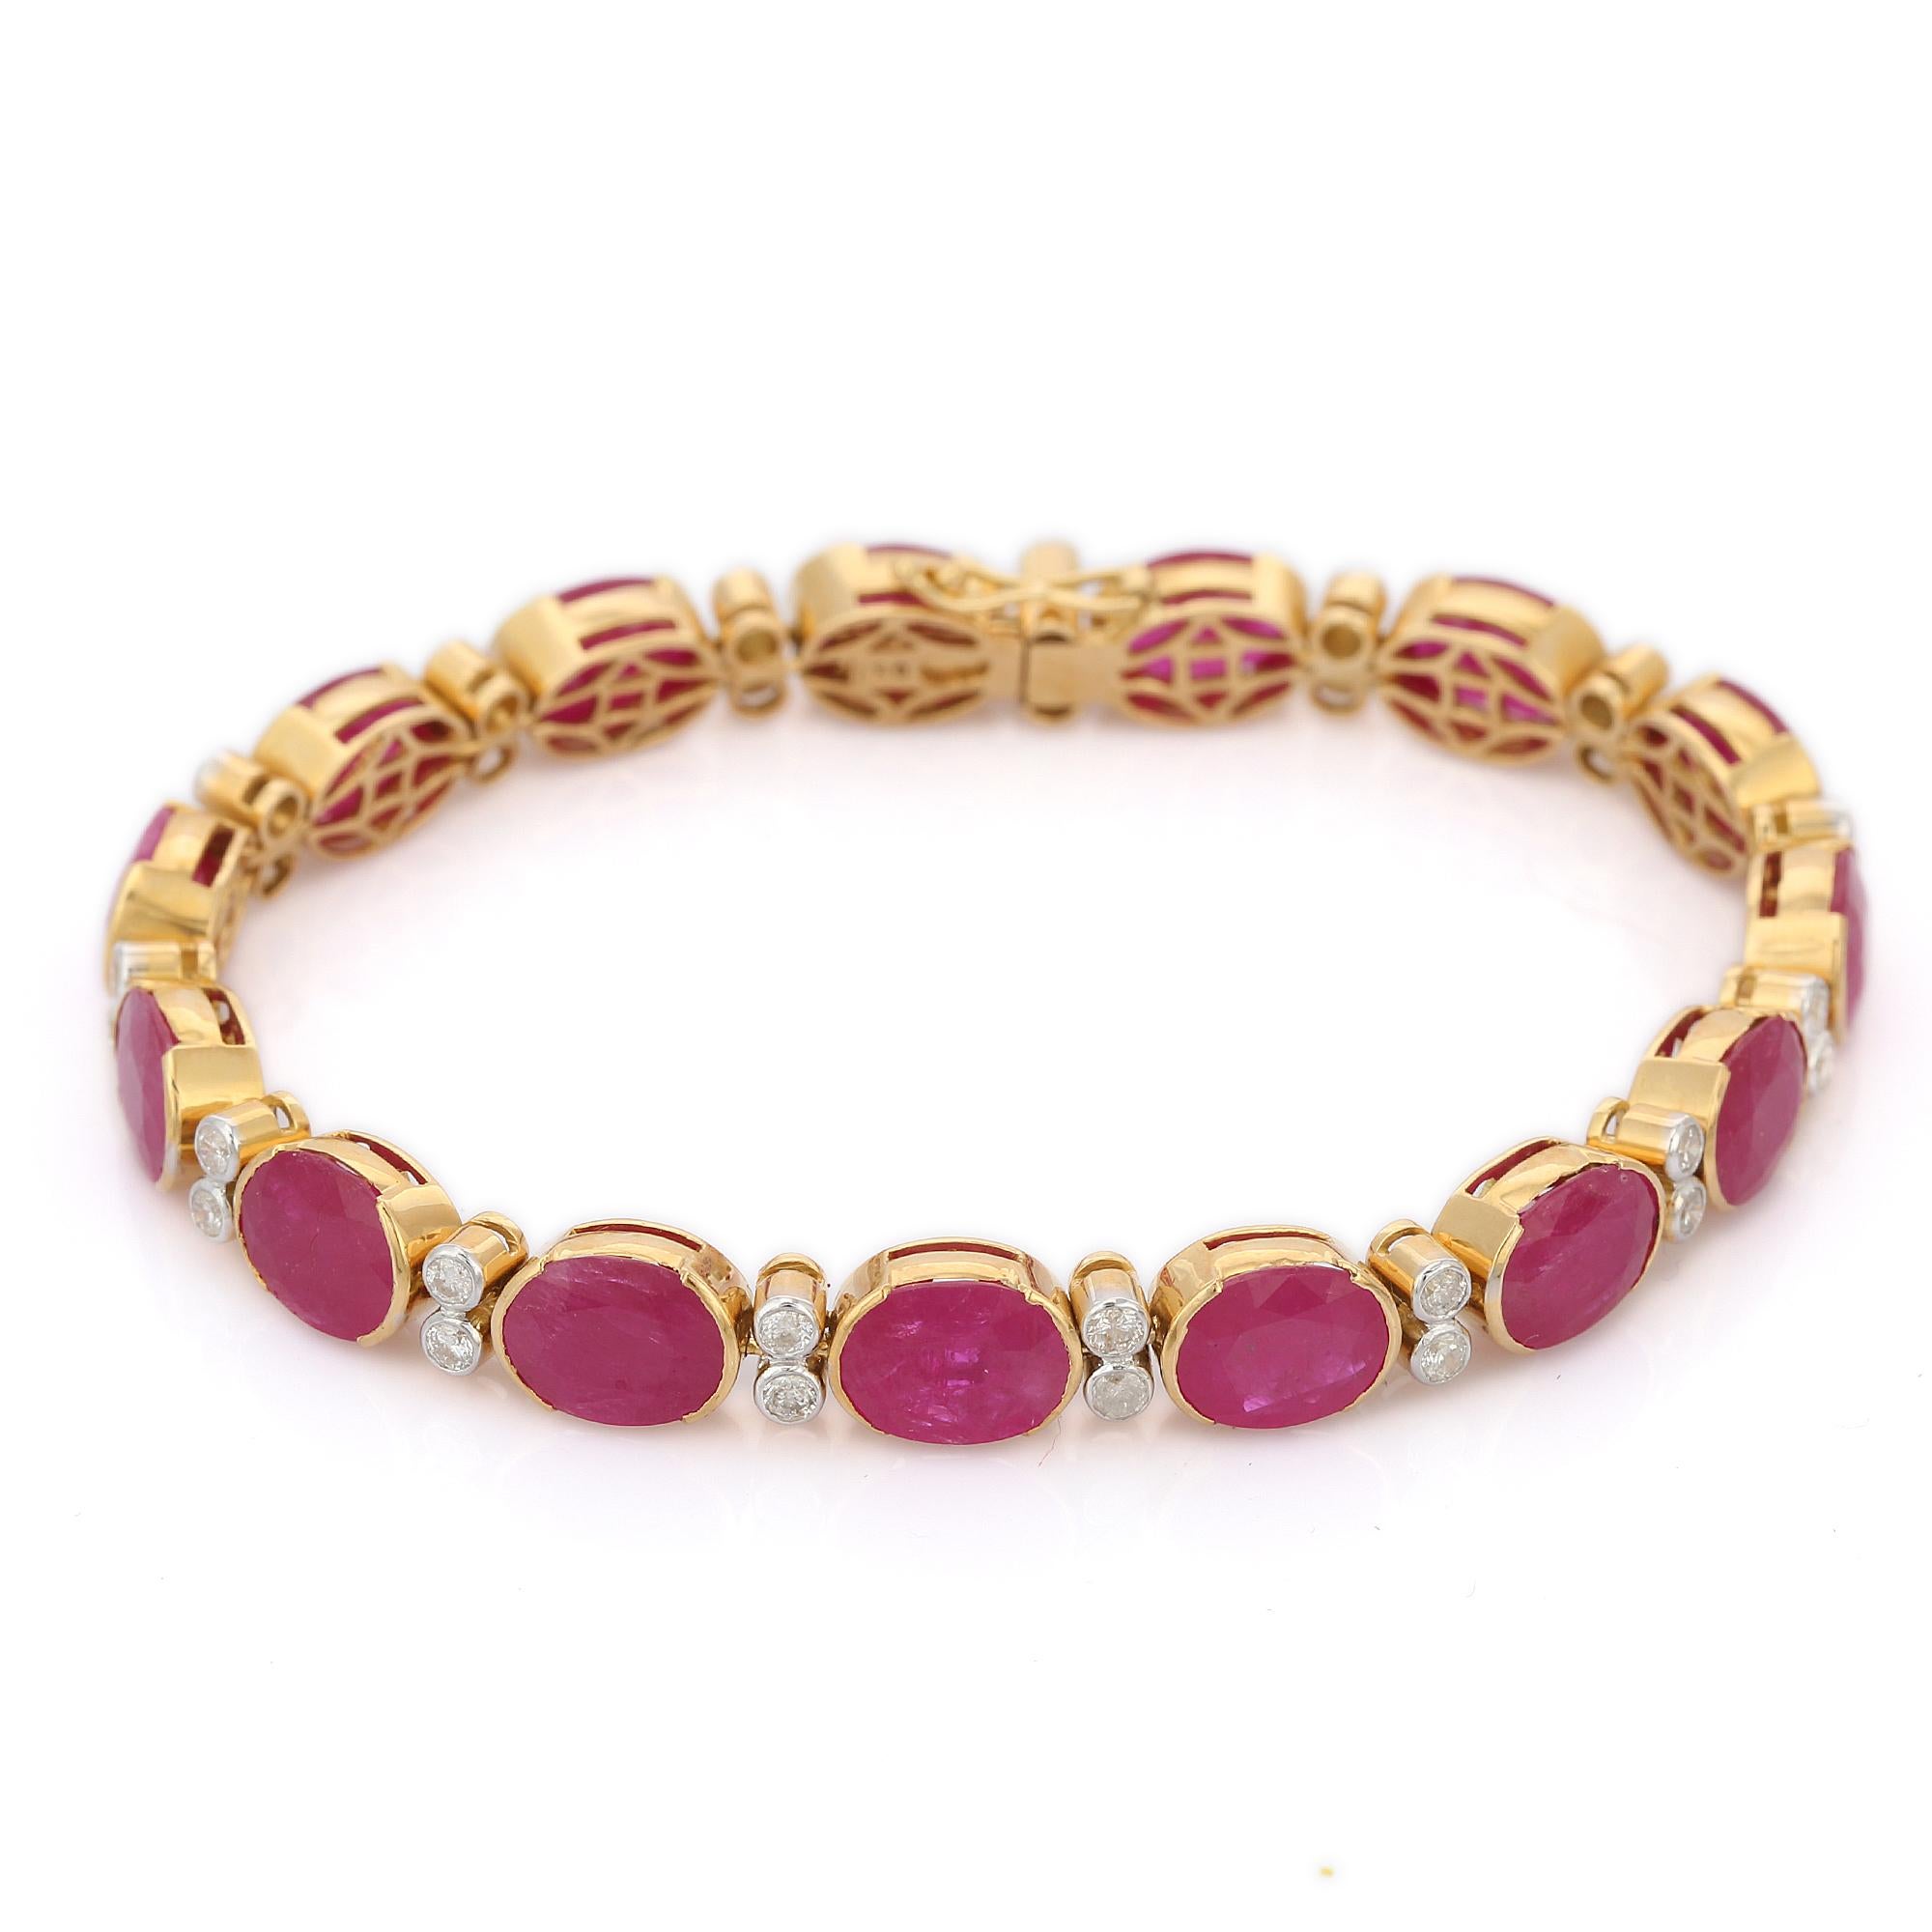 29.6 Cts Oval Cut Ruby and Diamond Bracelet in 18K Yellow Gold  For Sale 4